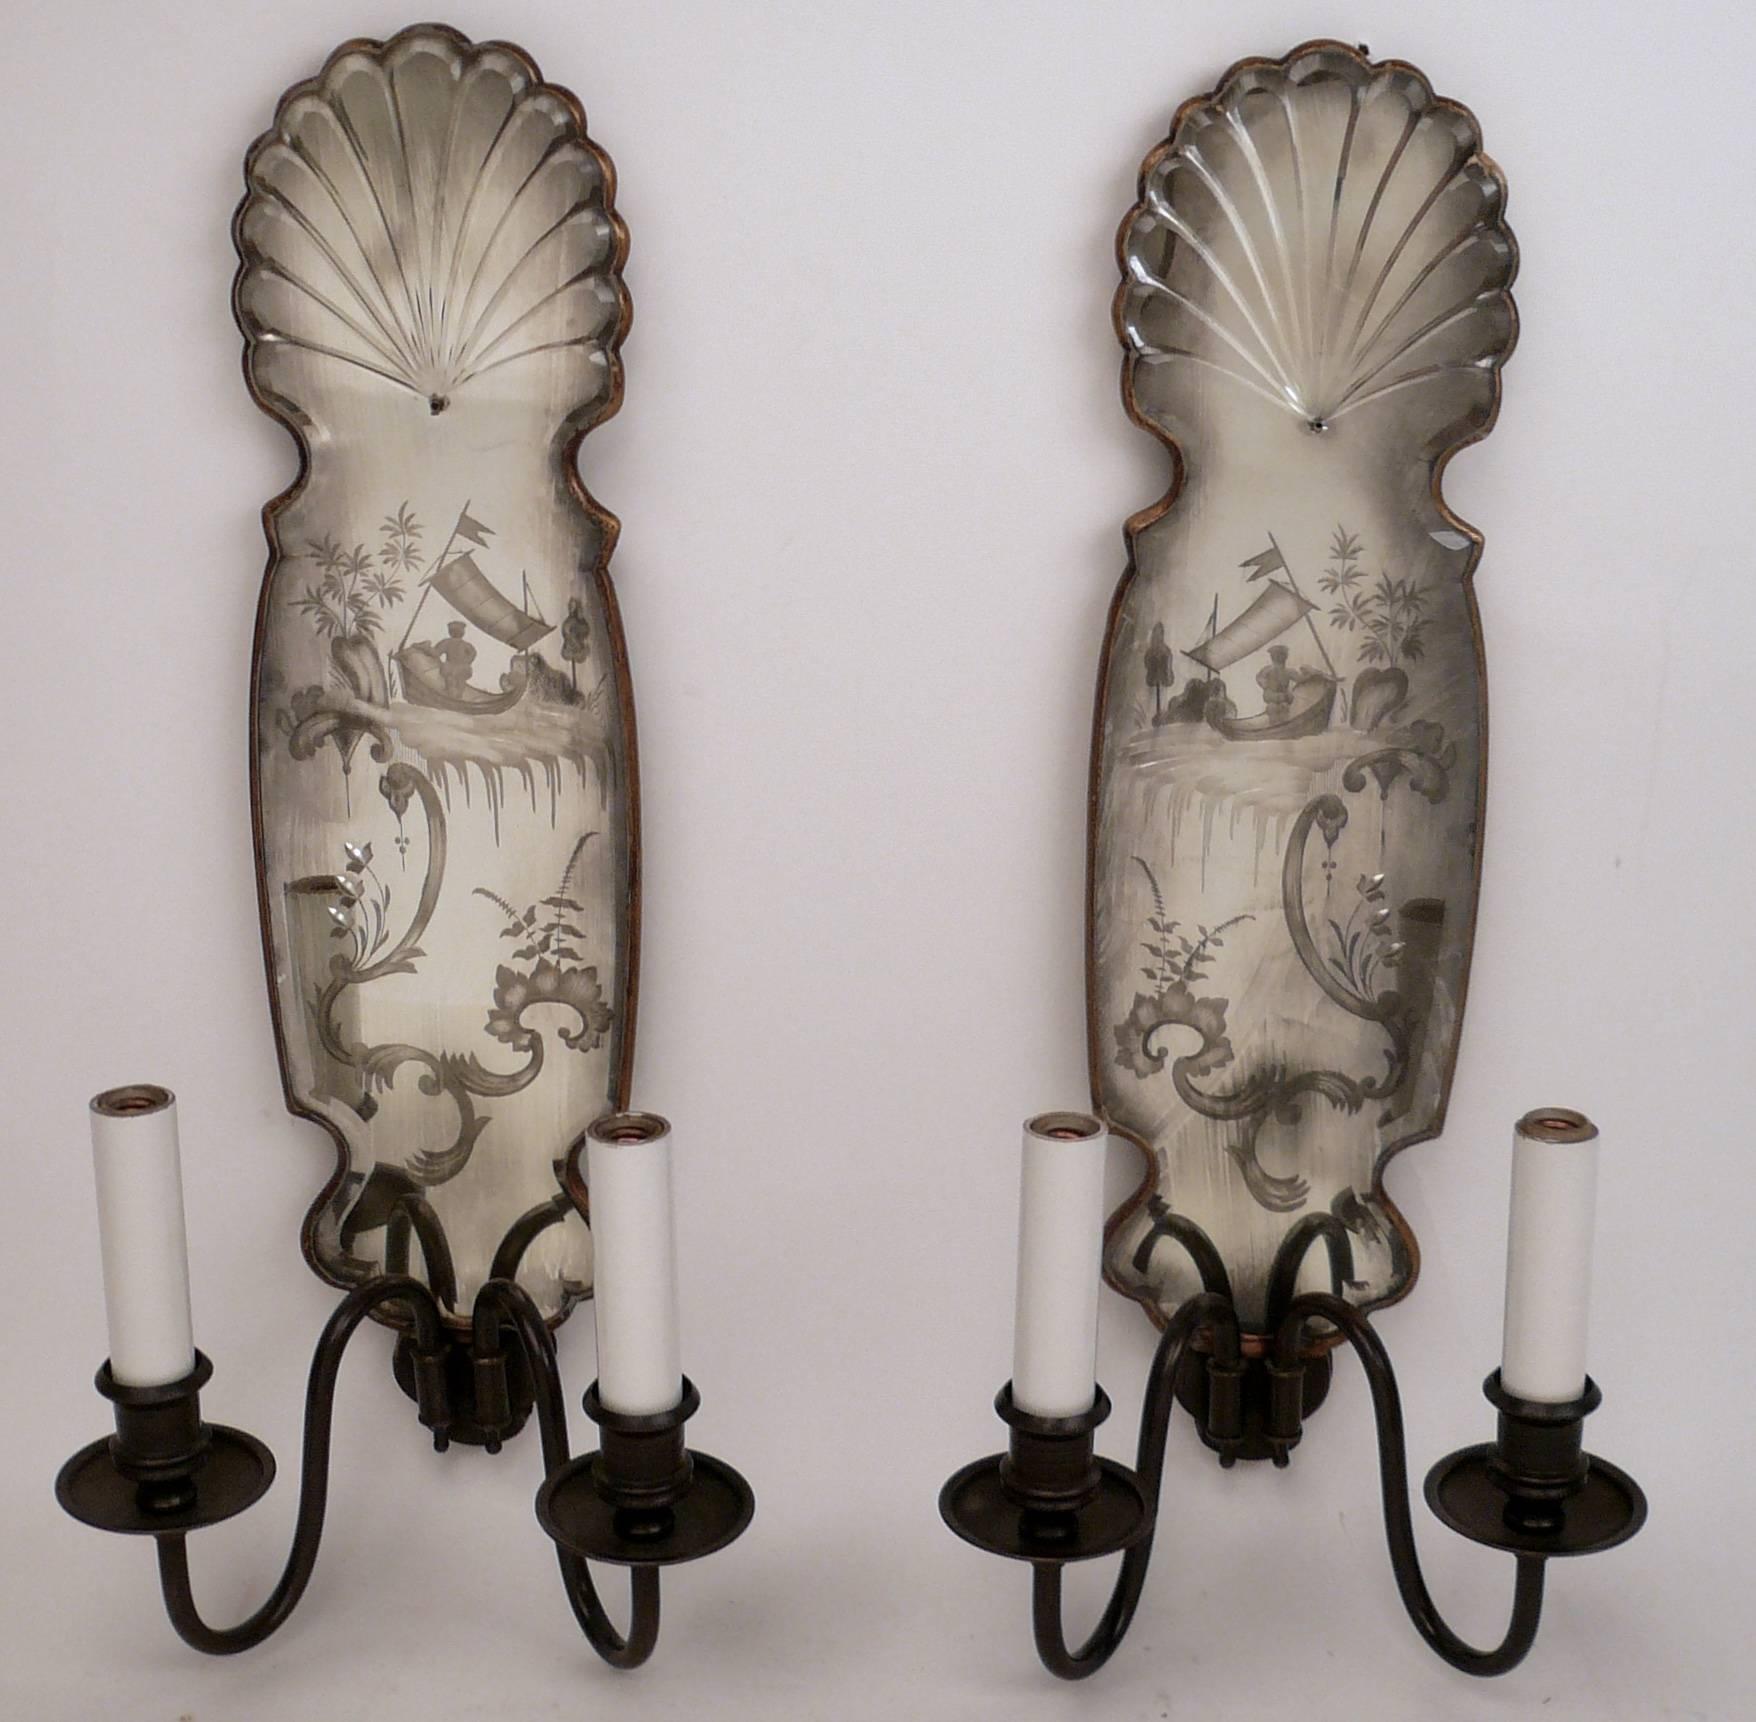 20th Century Set of Four Chinoiserie Motif Mirrored Back Sconces, by E.F. Caldwell